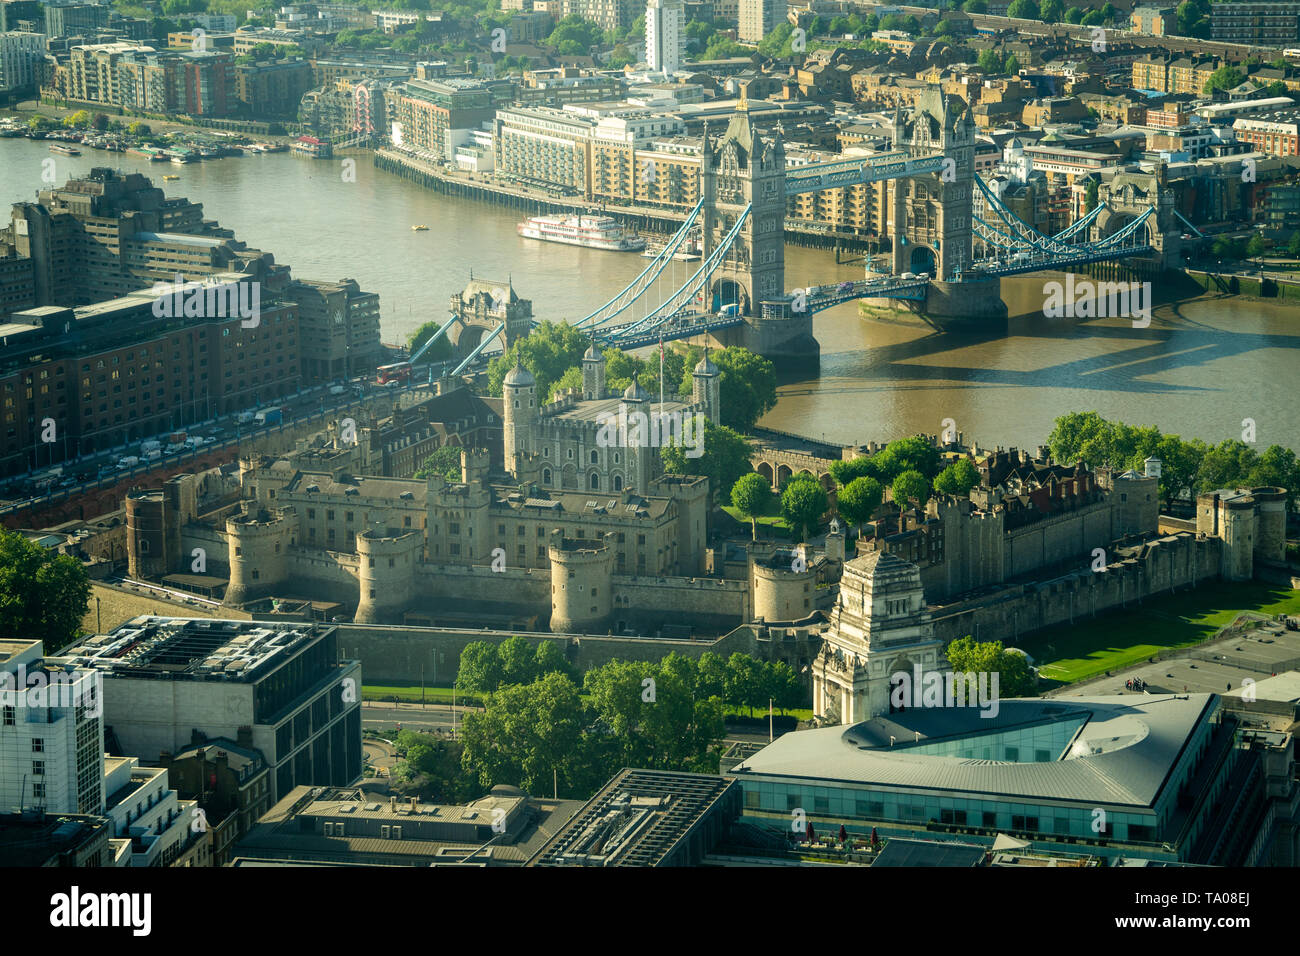 Views of The Tower of London as seen from Searcys on the top floor of the Gherkin building in London. Photo date: Tuesday, May 21, 2019. Photo: Roger  Stock Photo